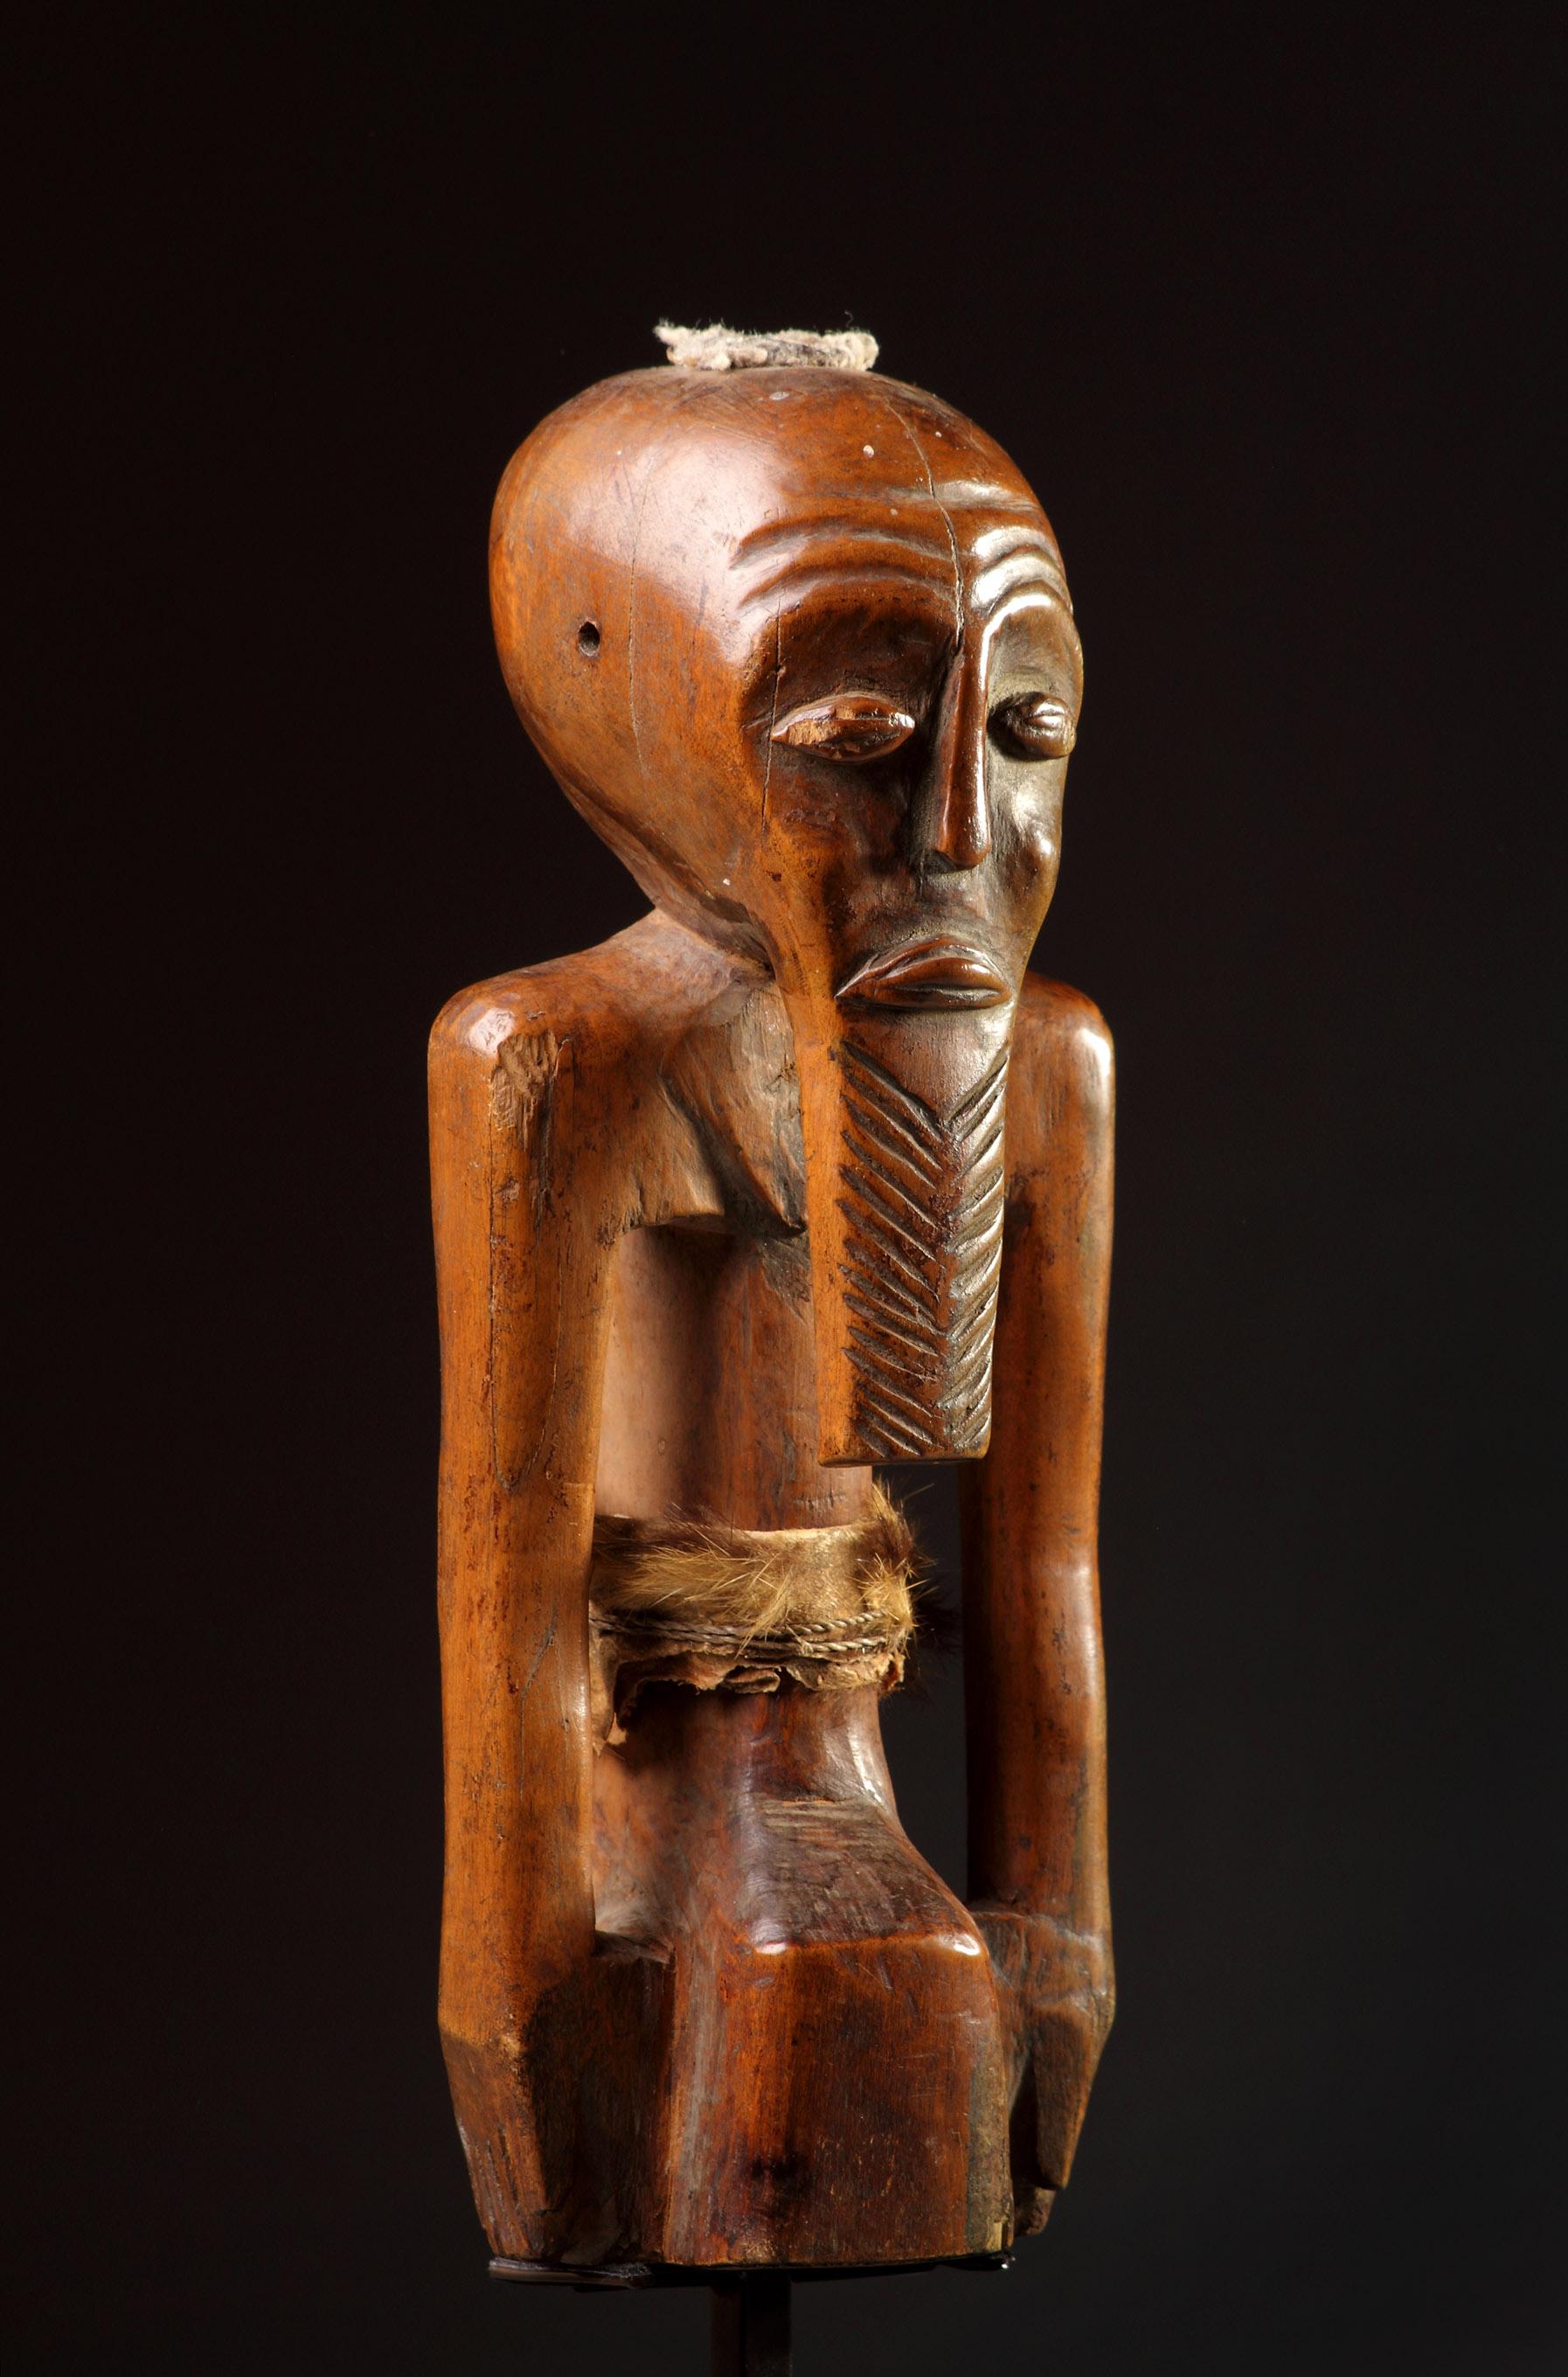 Congolese A South Eastern Congo, Zaire Songye Protective Fetish Figure ‘Nkishi’ of Geometr For Sale